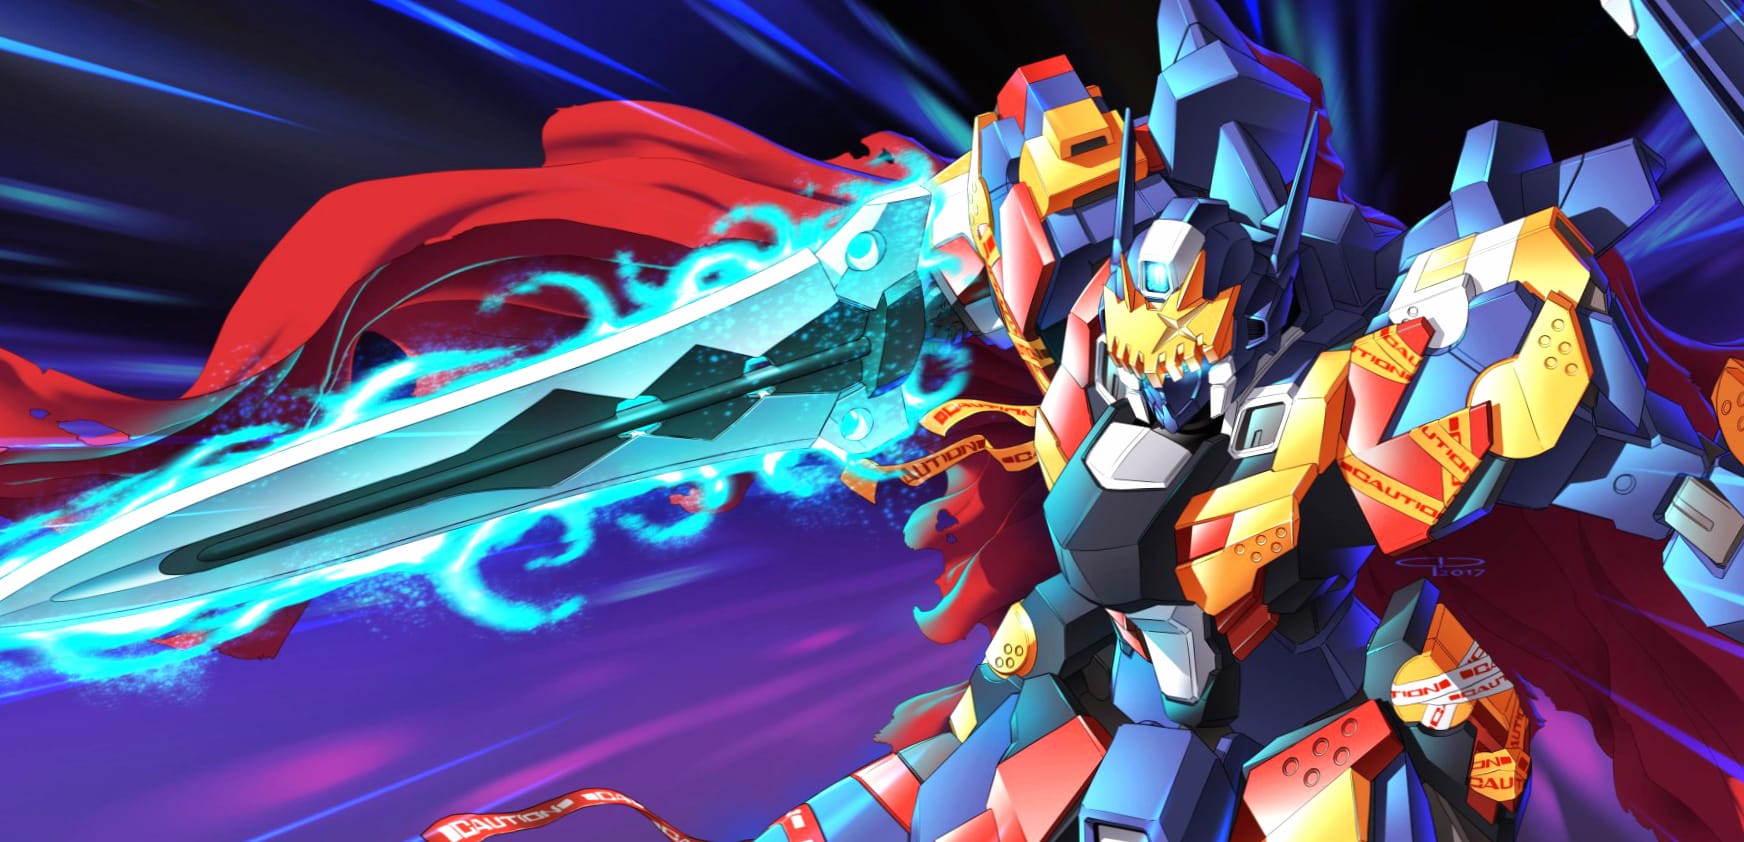 Super Robot Wars wallpapers HD quality